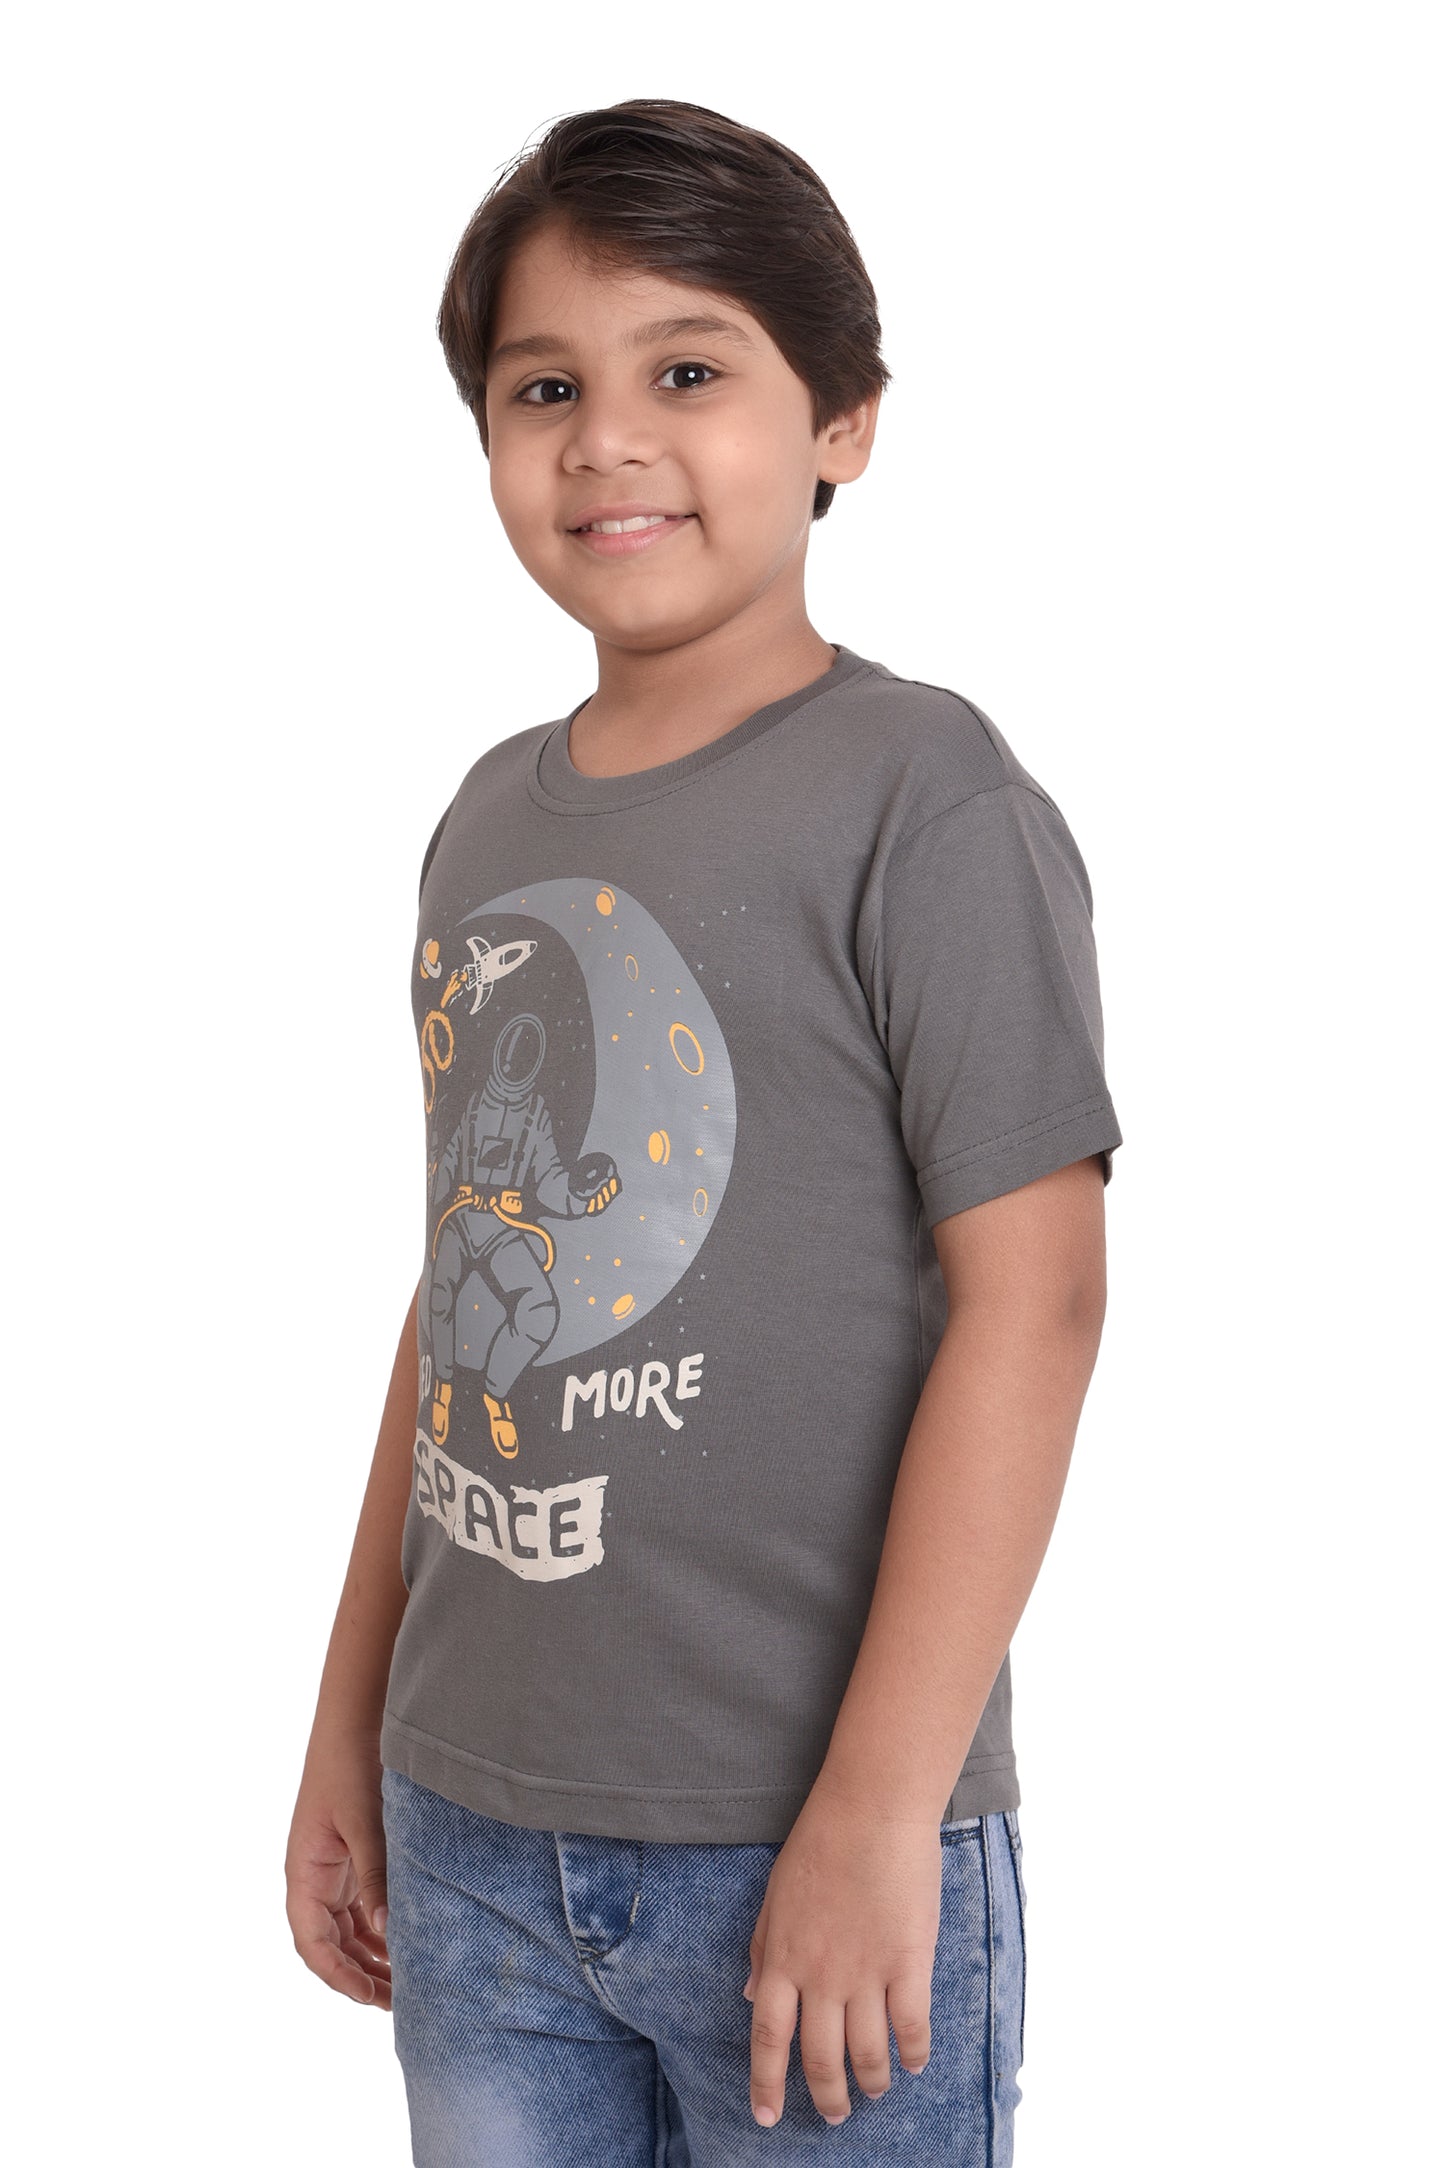 NEO GARMENTS Boys Cotton Round Neck Half sleeves T-Shirt - I NEED MORE SPACE. | SIZE FROM 7YRS TO 14YRS.